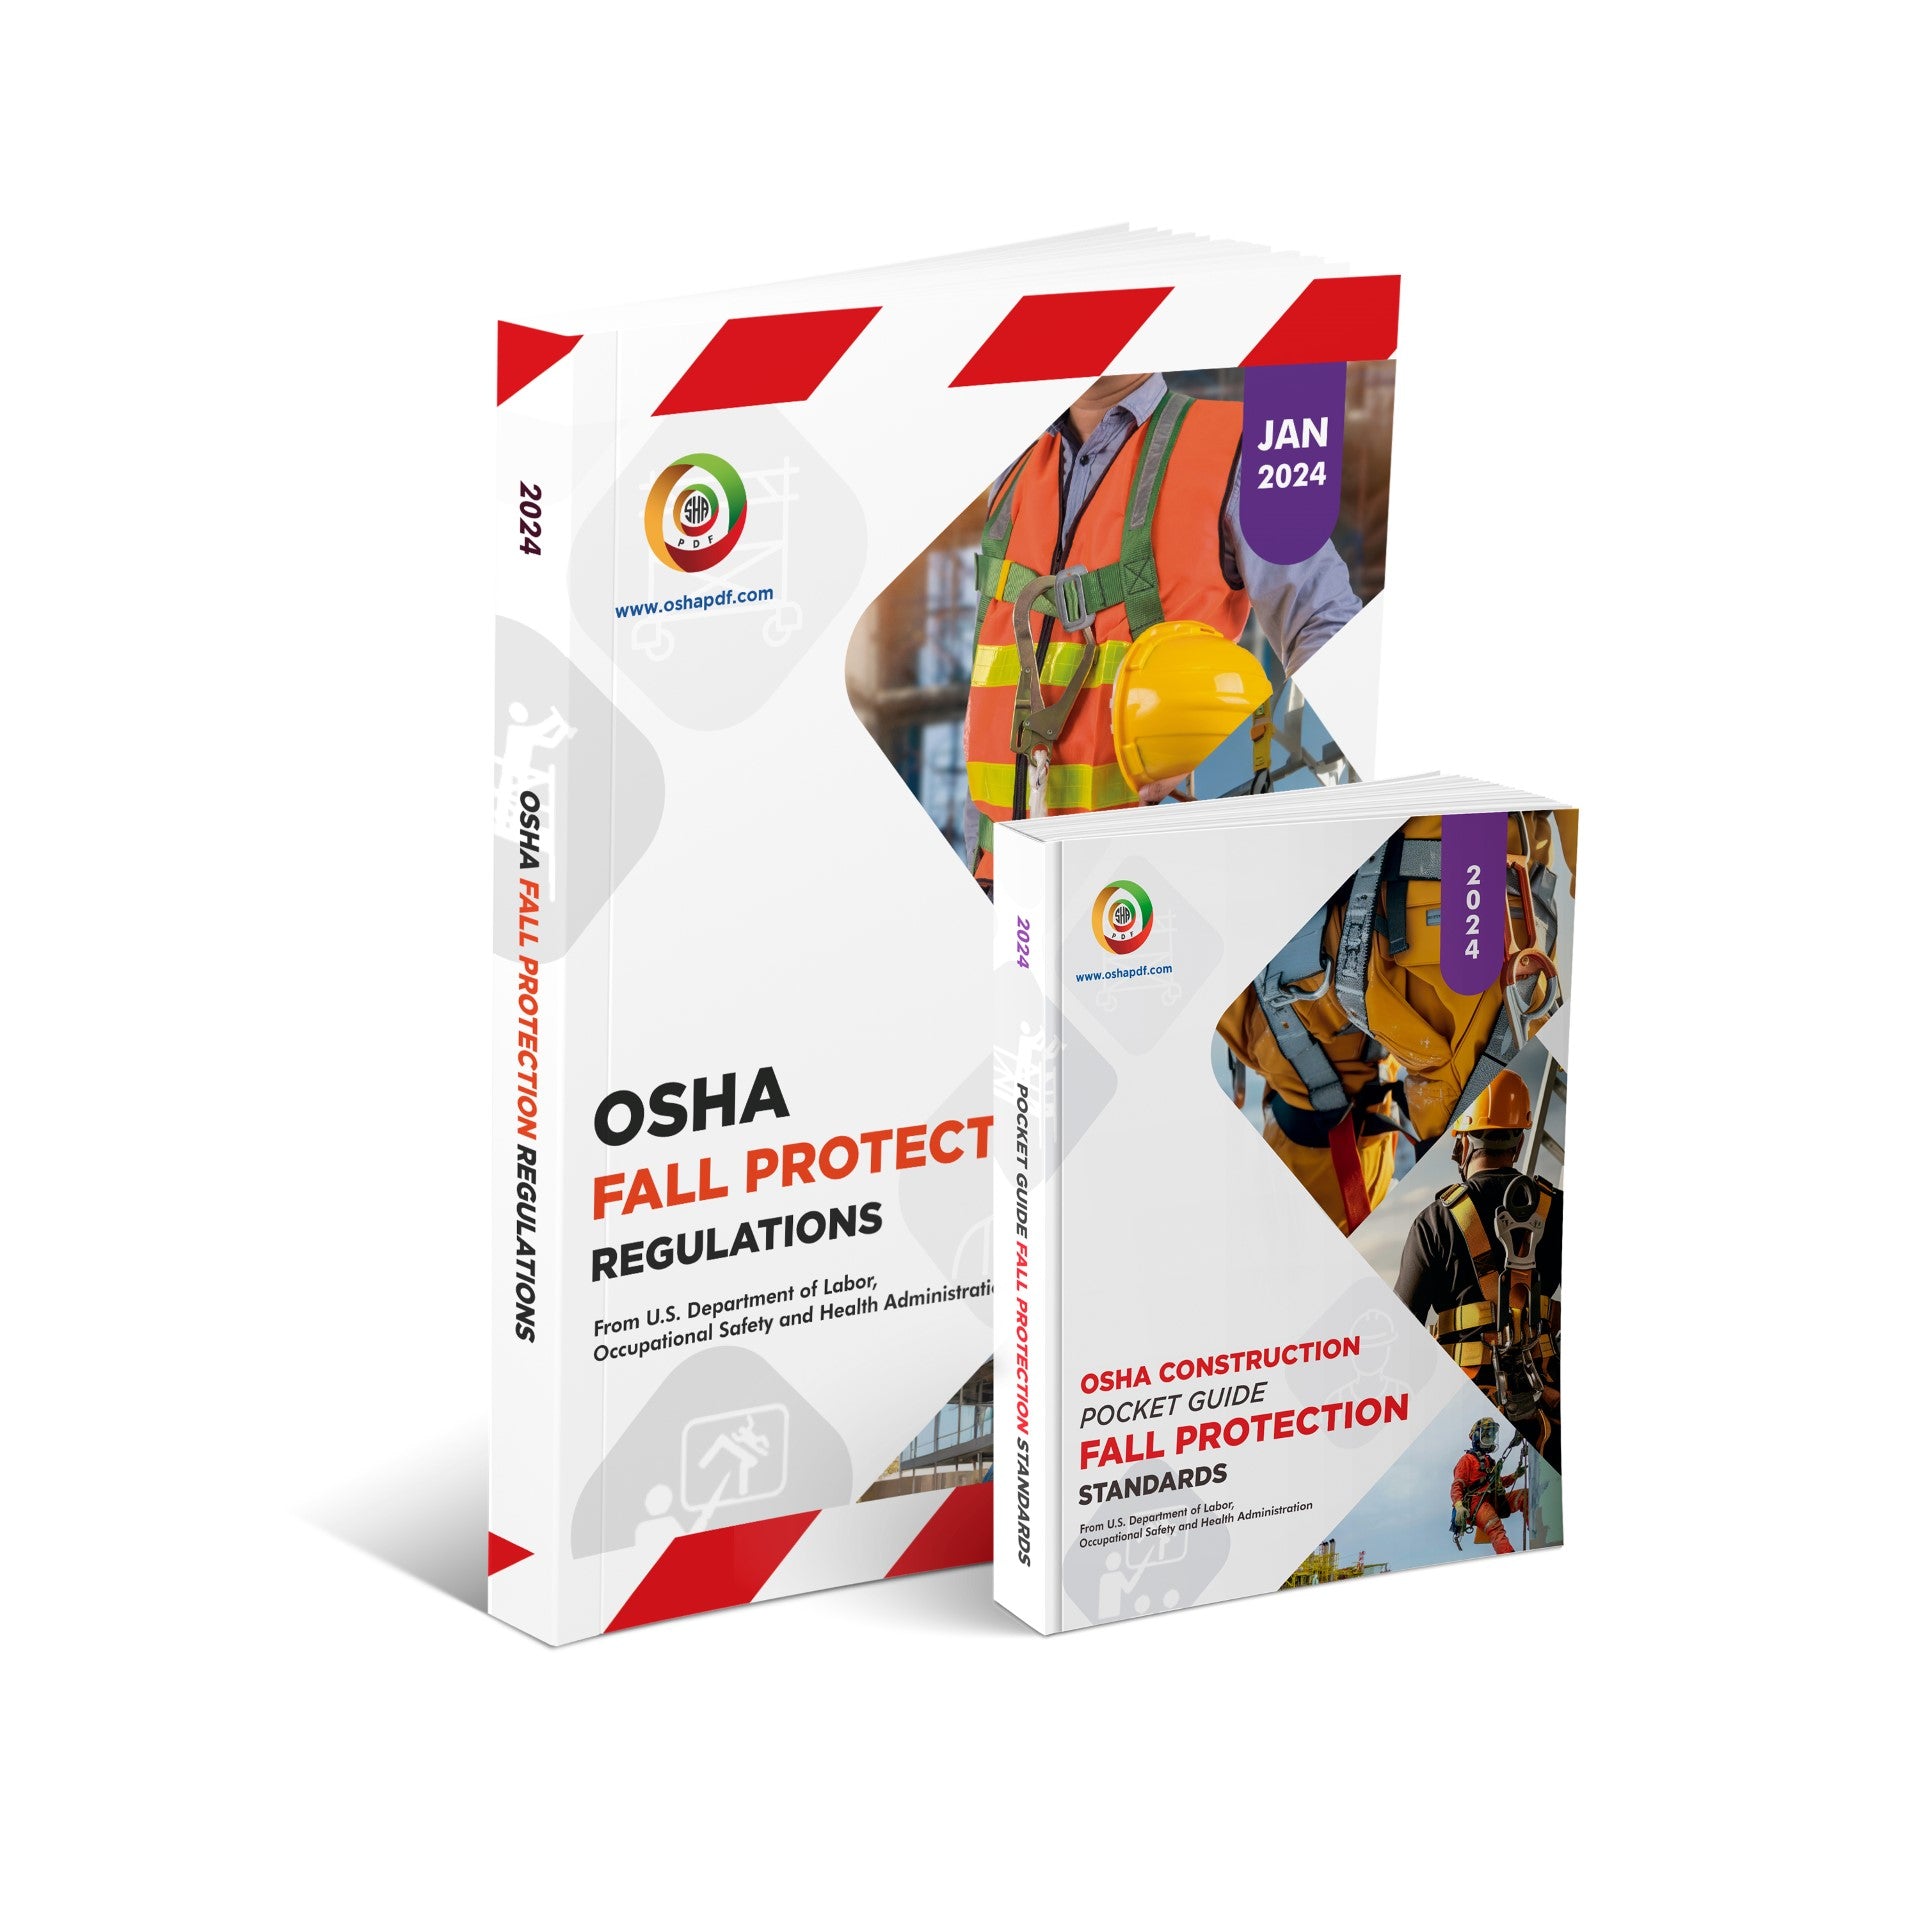 Fall Protection Regulations 2024 Book and Pocket Guide Combo